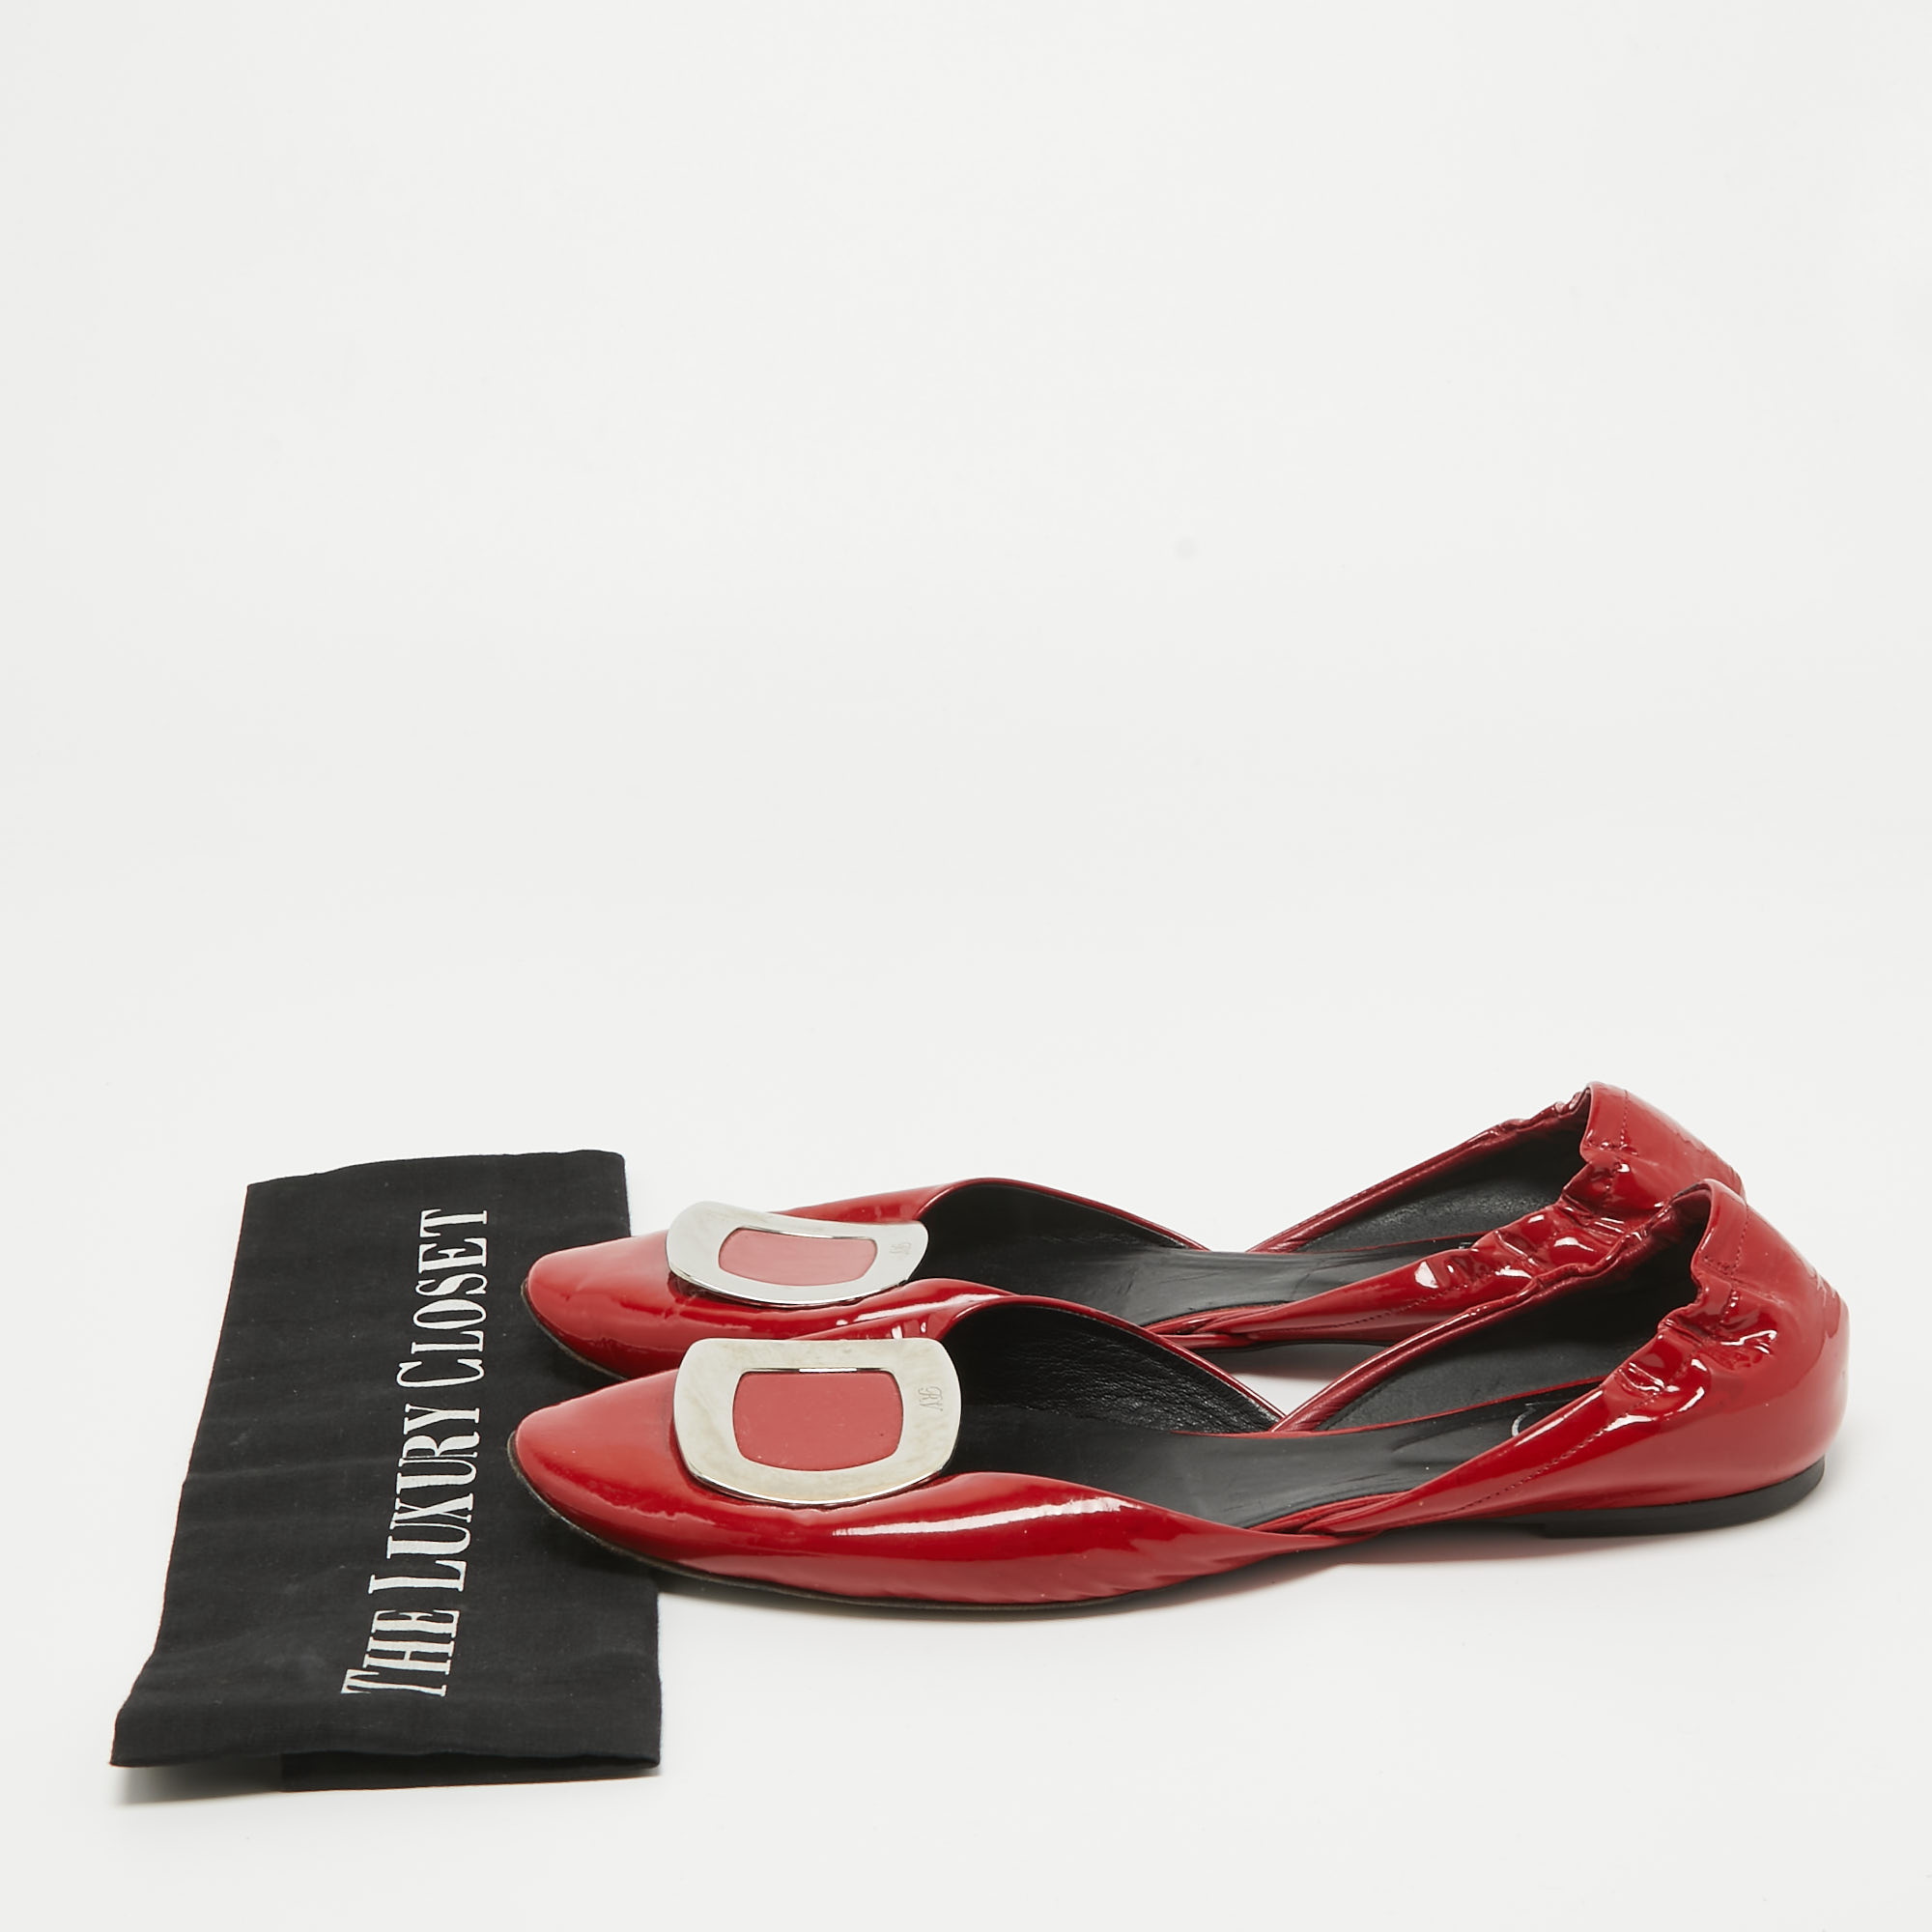 Roger Vivier Red Patent Leather D'Orsay Pointed Toe Ballet Flats Size 40.5